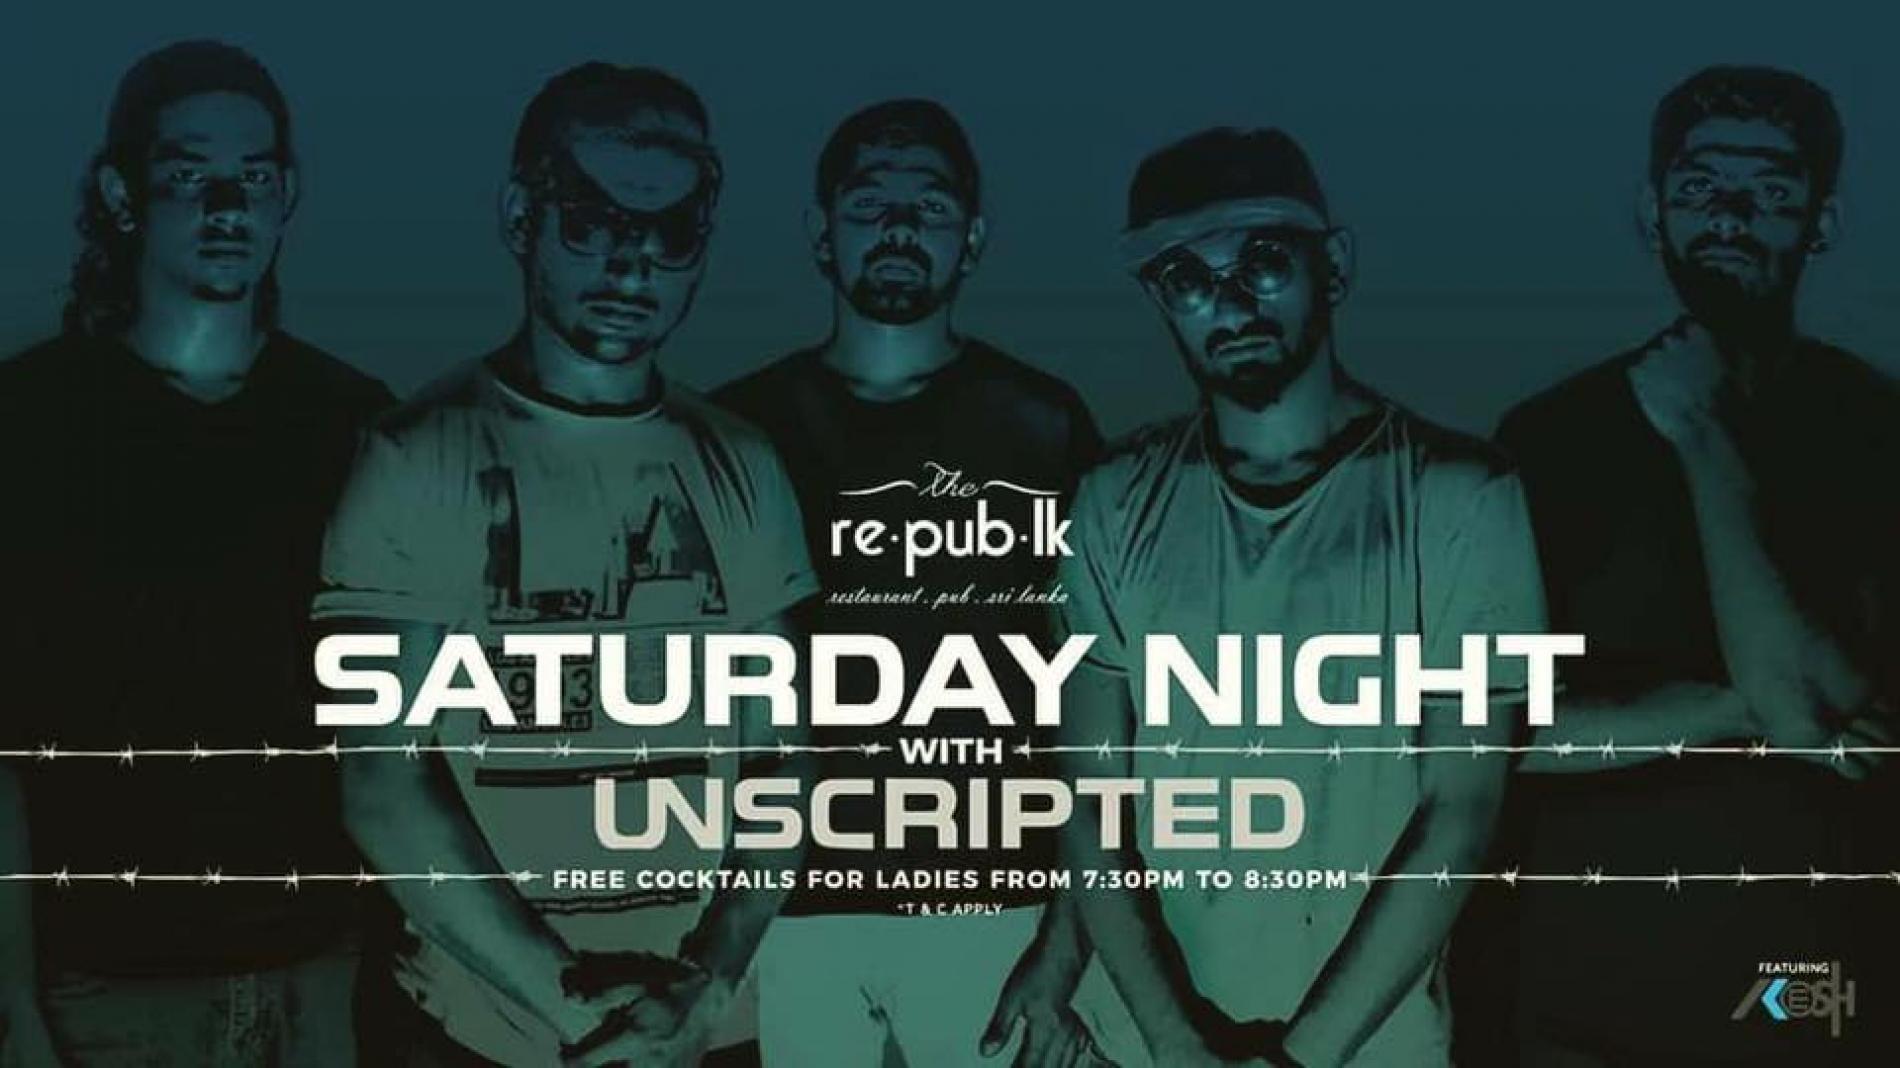 Saturday Night With Unscripted